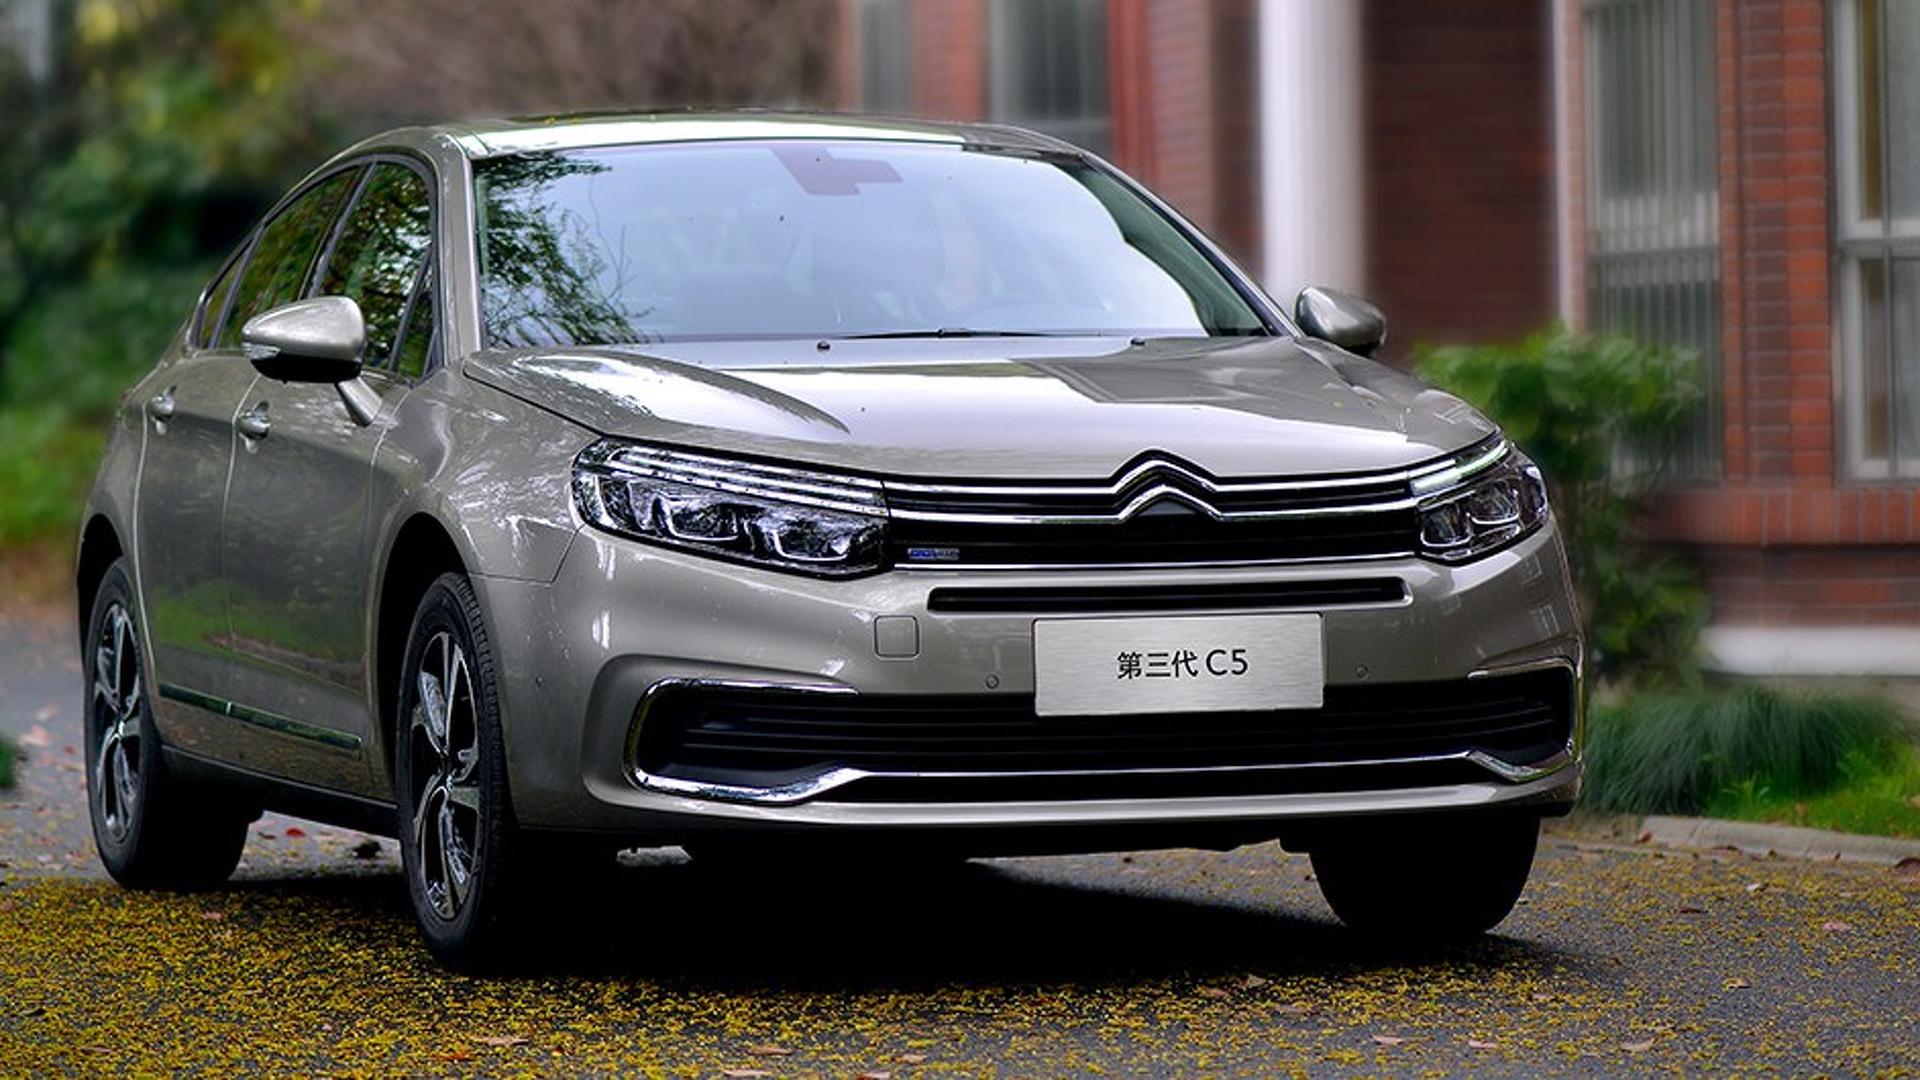 Citroen Announces All-New C5 For 2020 Launch In Europe